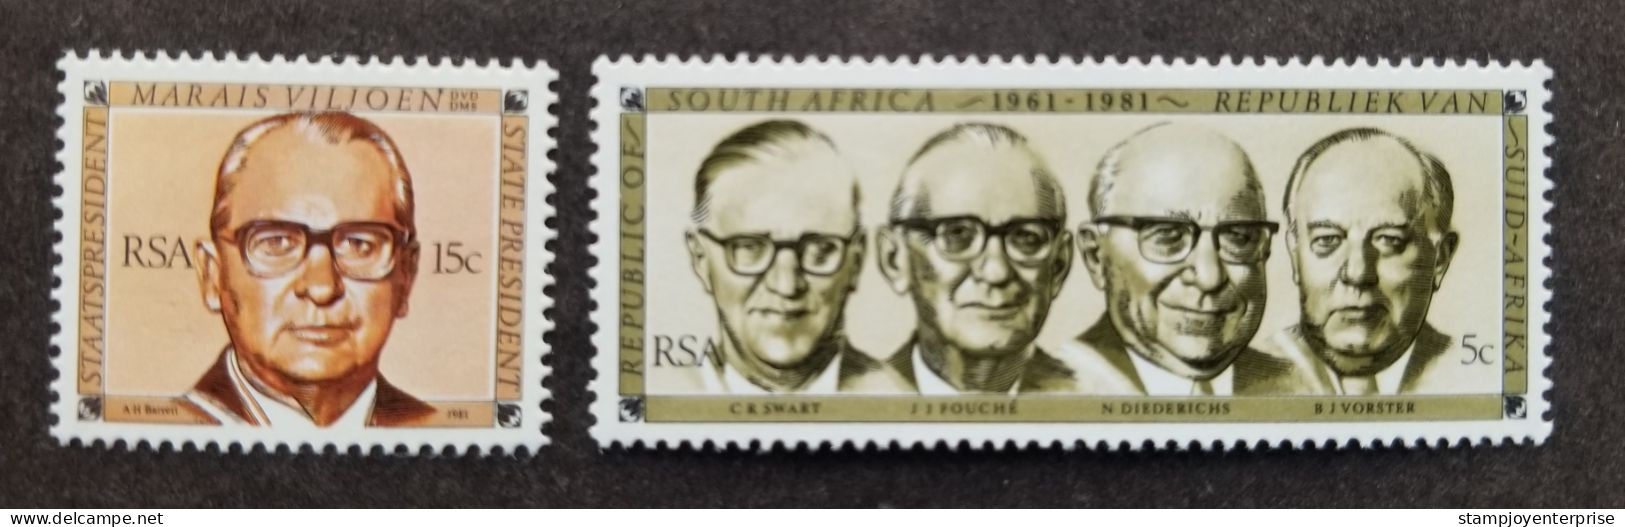 South Africa 20th Anniversary Founding Republic 1981 President (stamp) MNH - Ungebraucht